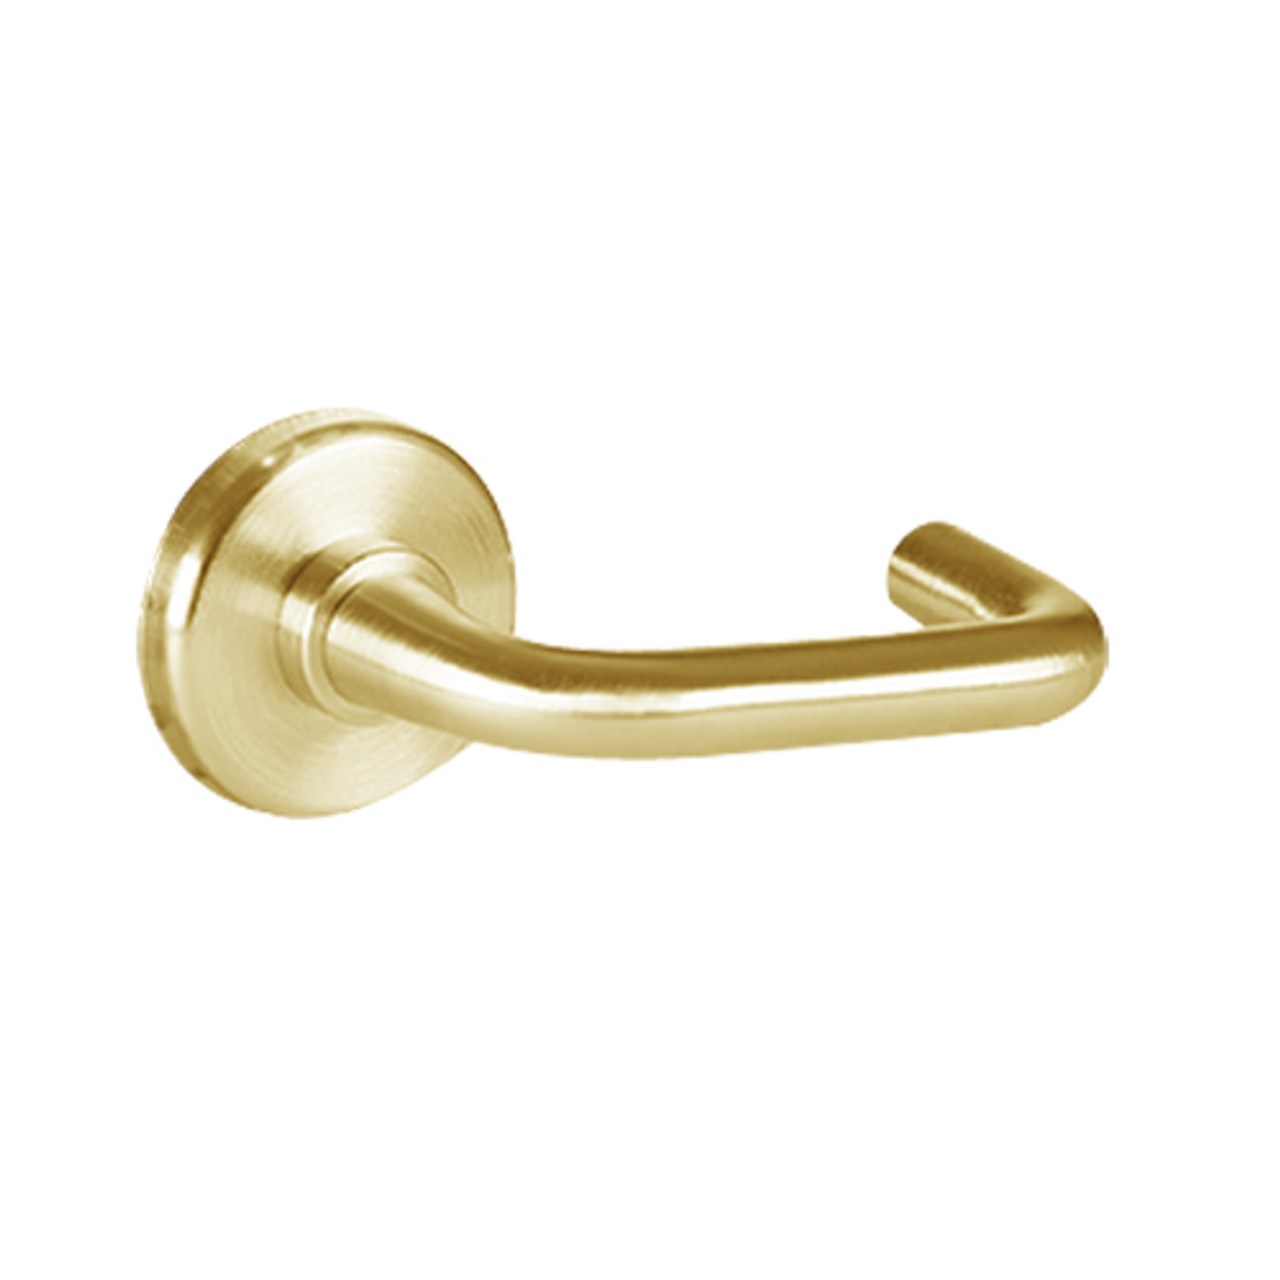 40HTKIS23H606 Best 40H Series Trim Kits Inside Lever w/ turn with Solid Tube-Return Trim Style in Satin Brass